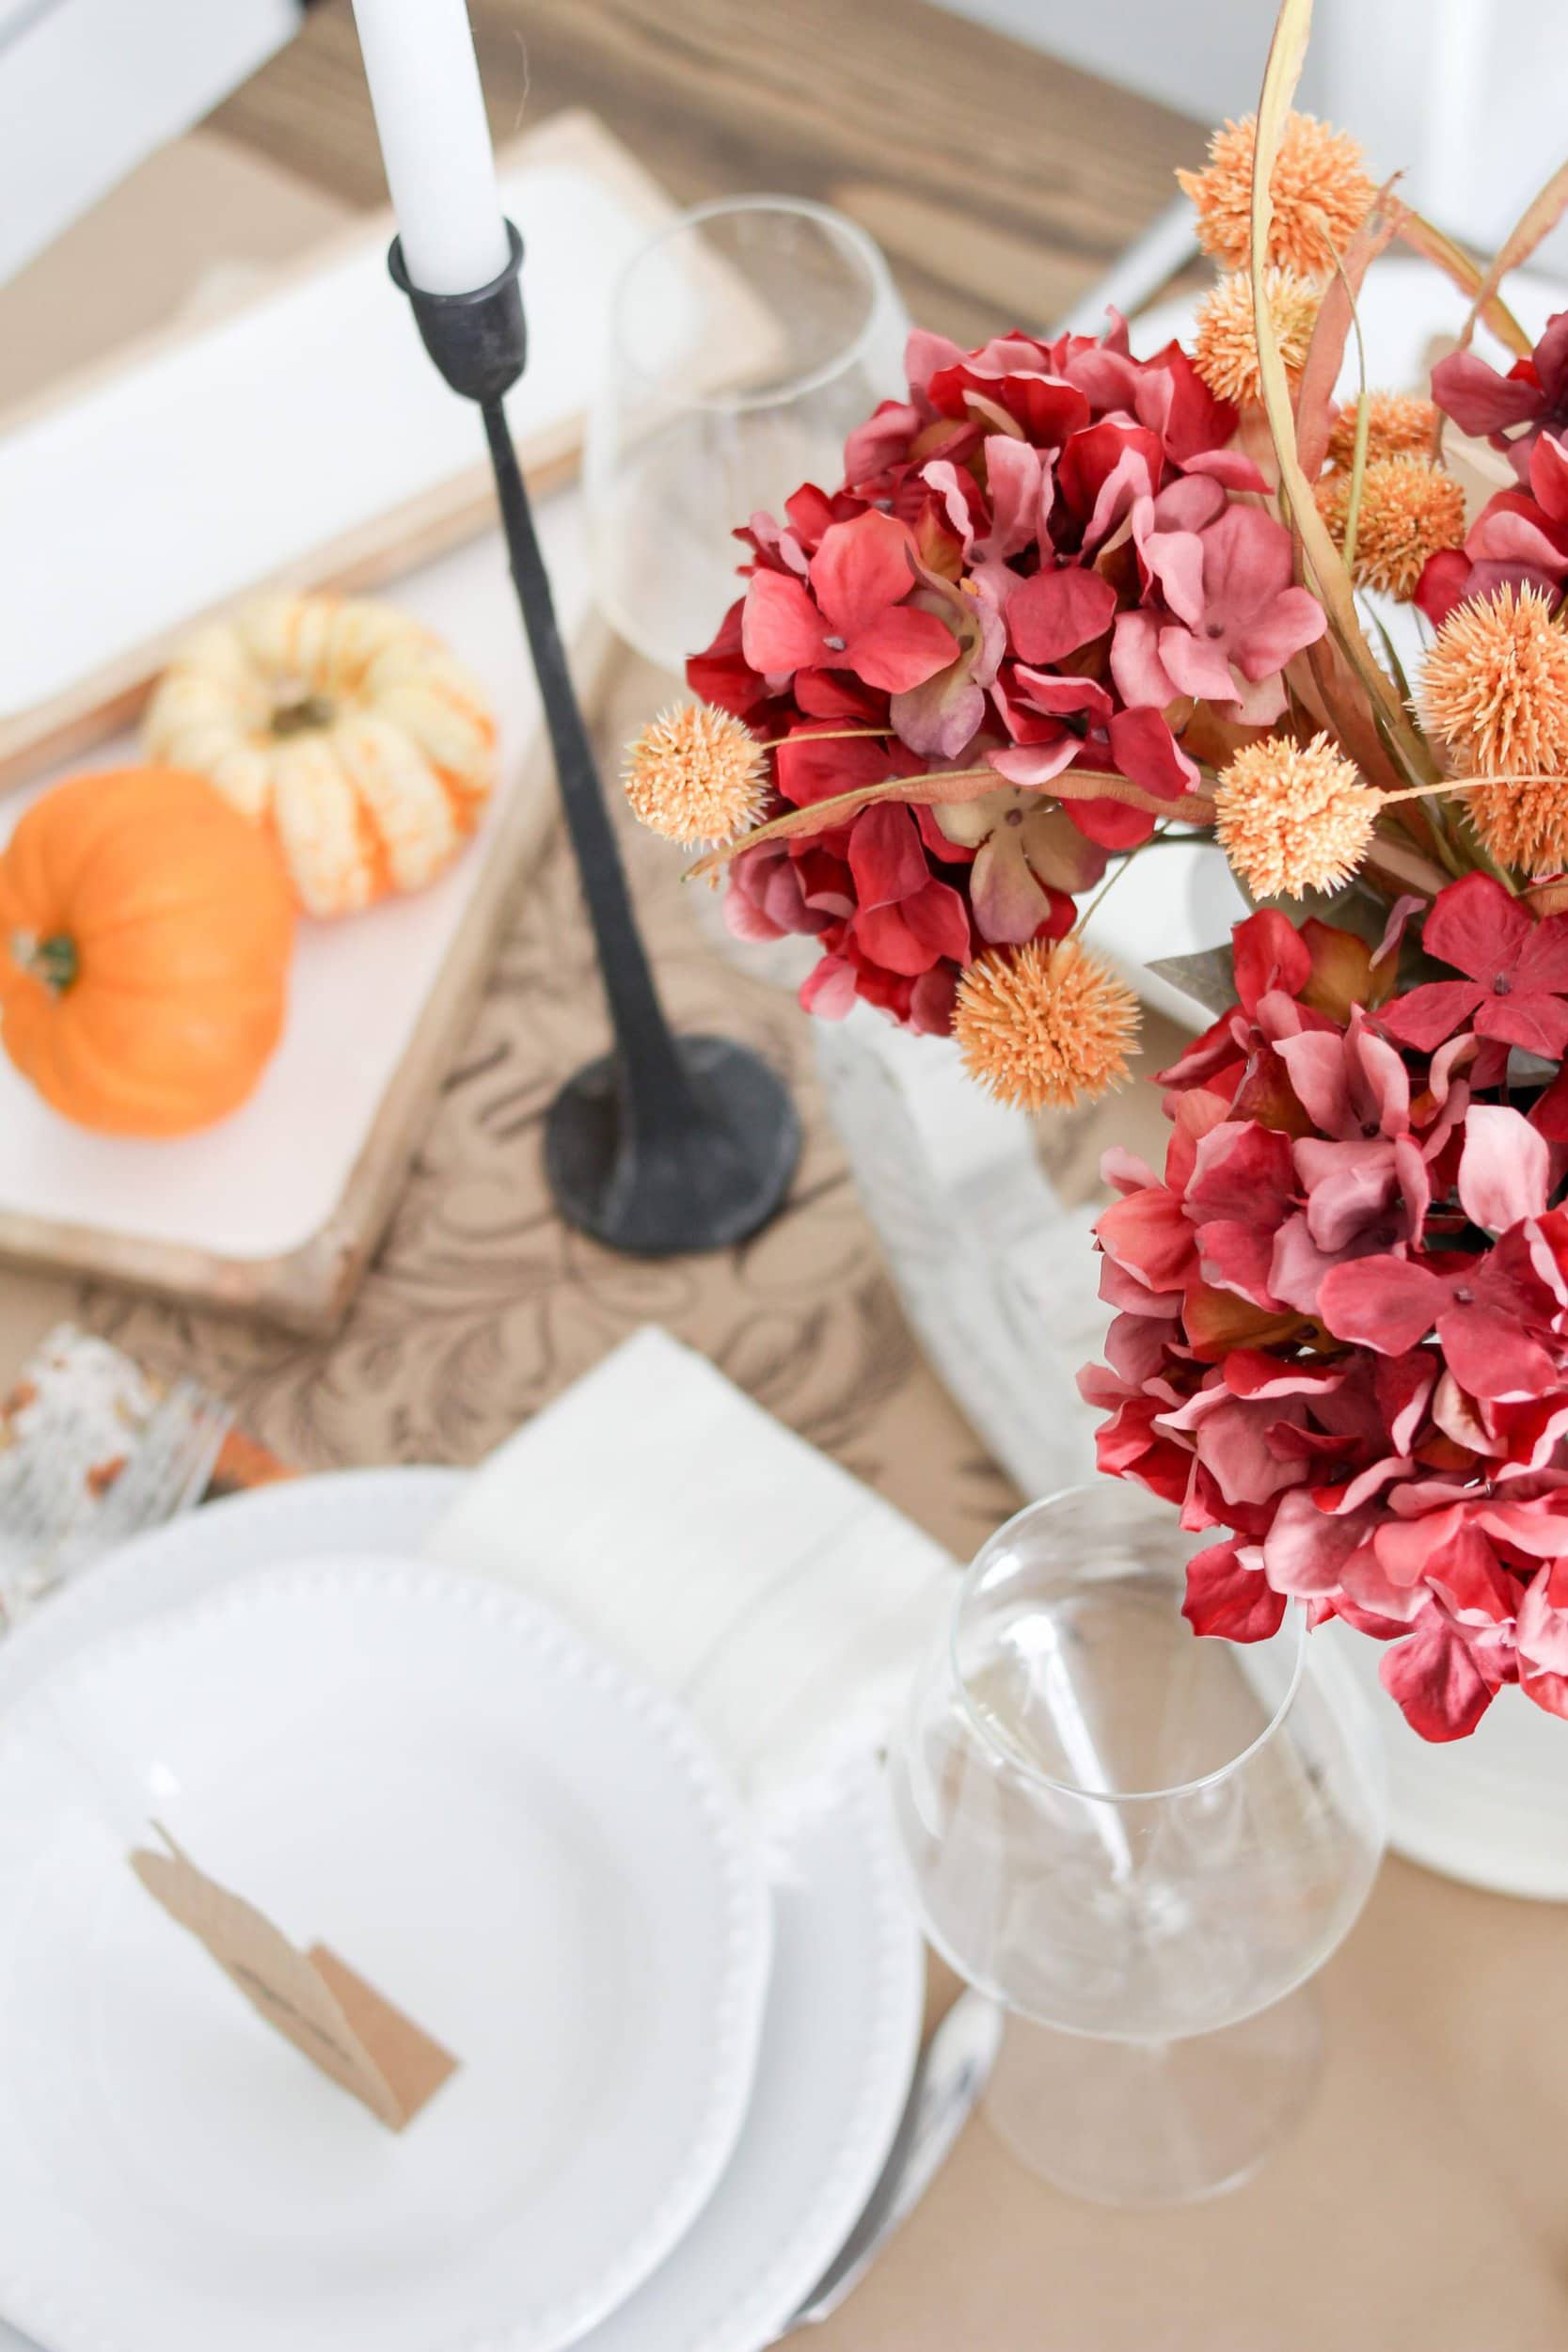 Fall Thanksgiving tablescape table decor with red hydrangeas, orange fall stems, jack-be-little pumpins, gourds, wind elgasses, black cast iron candlesticks, and white plates